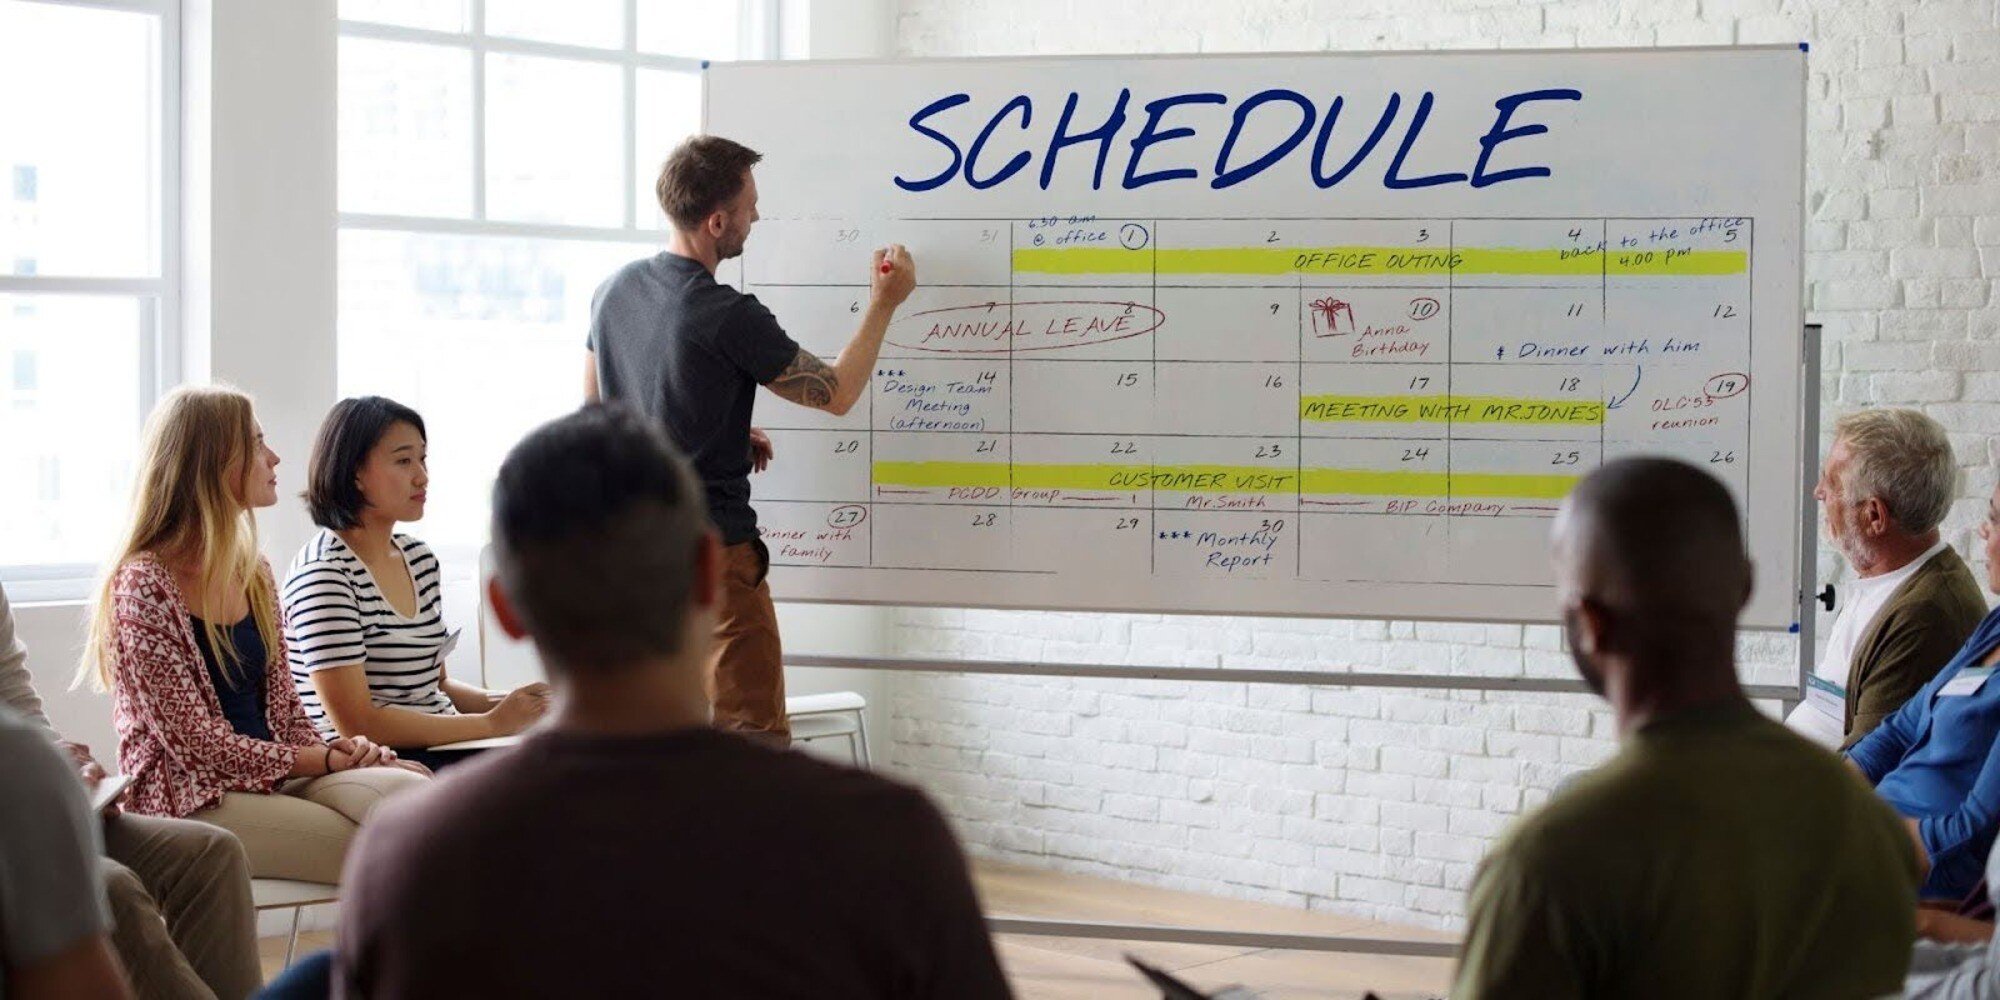 Working with schedule in the workplace.